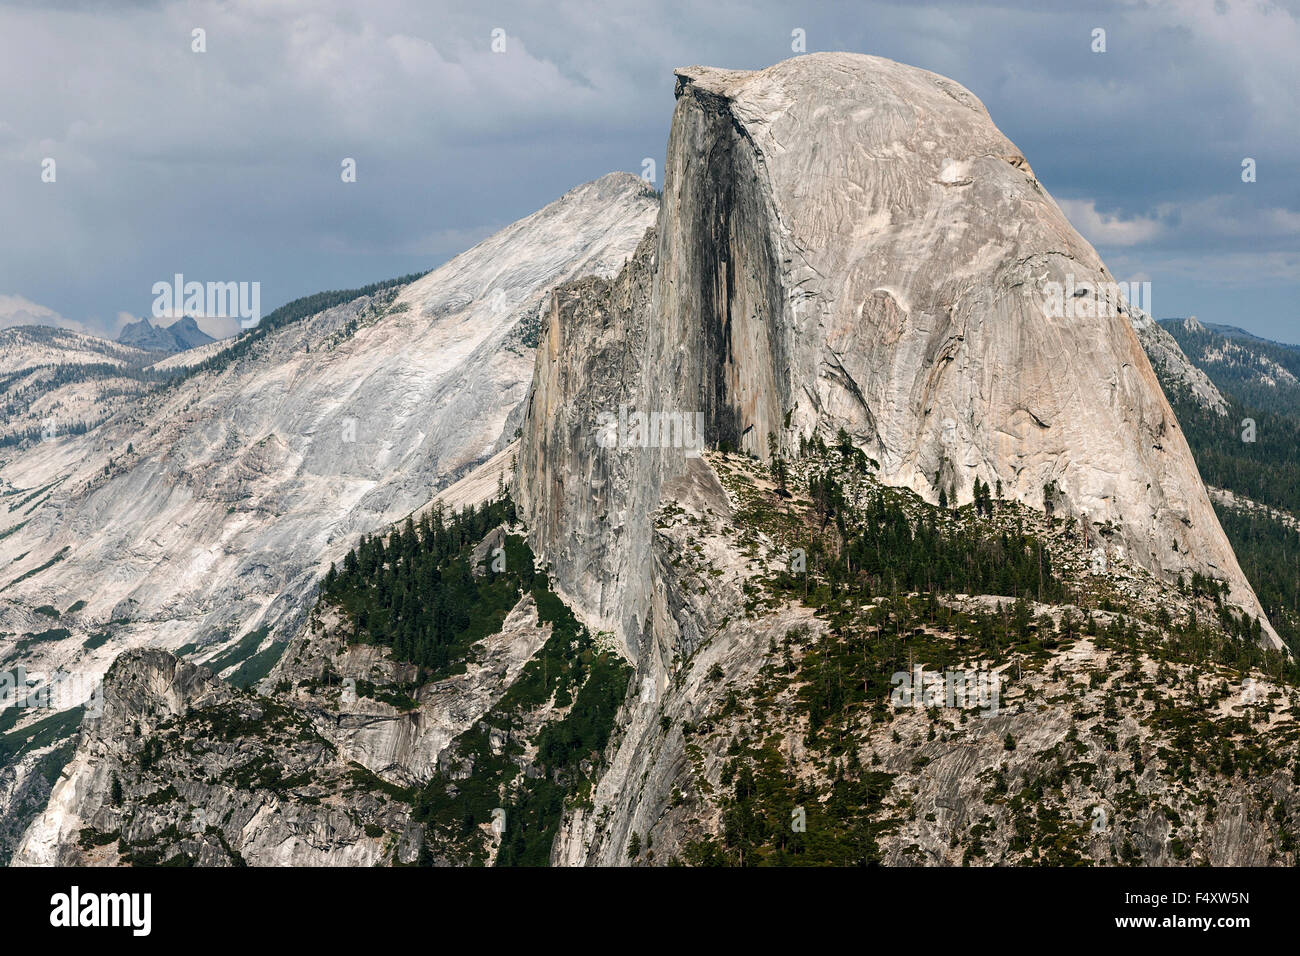 View from Glacier Point to Half Dome, Yosemite National Park, California, USA Stock Photo